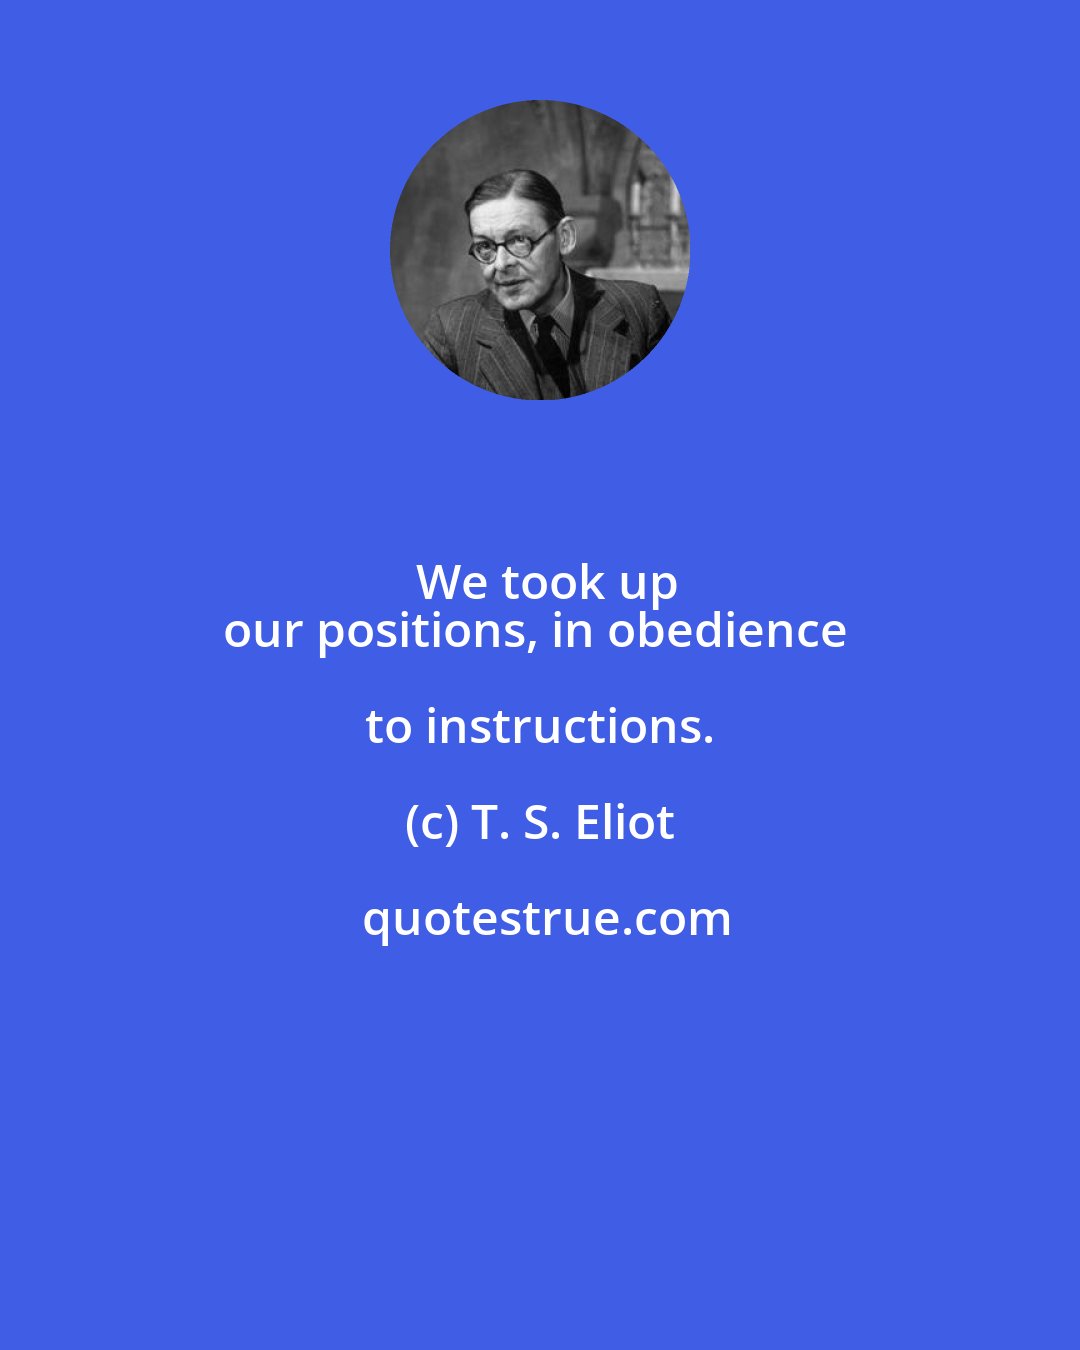 T. S. Eliot: We took up
our positions, in obedience to instructions.